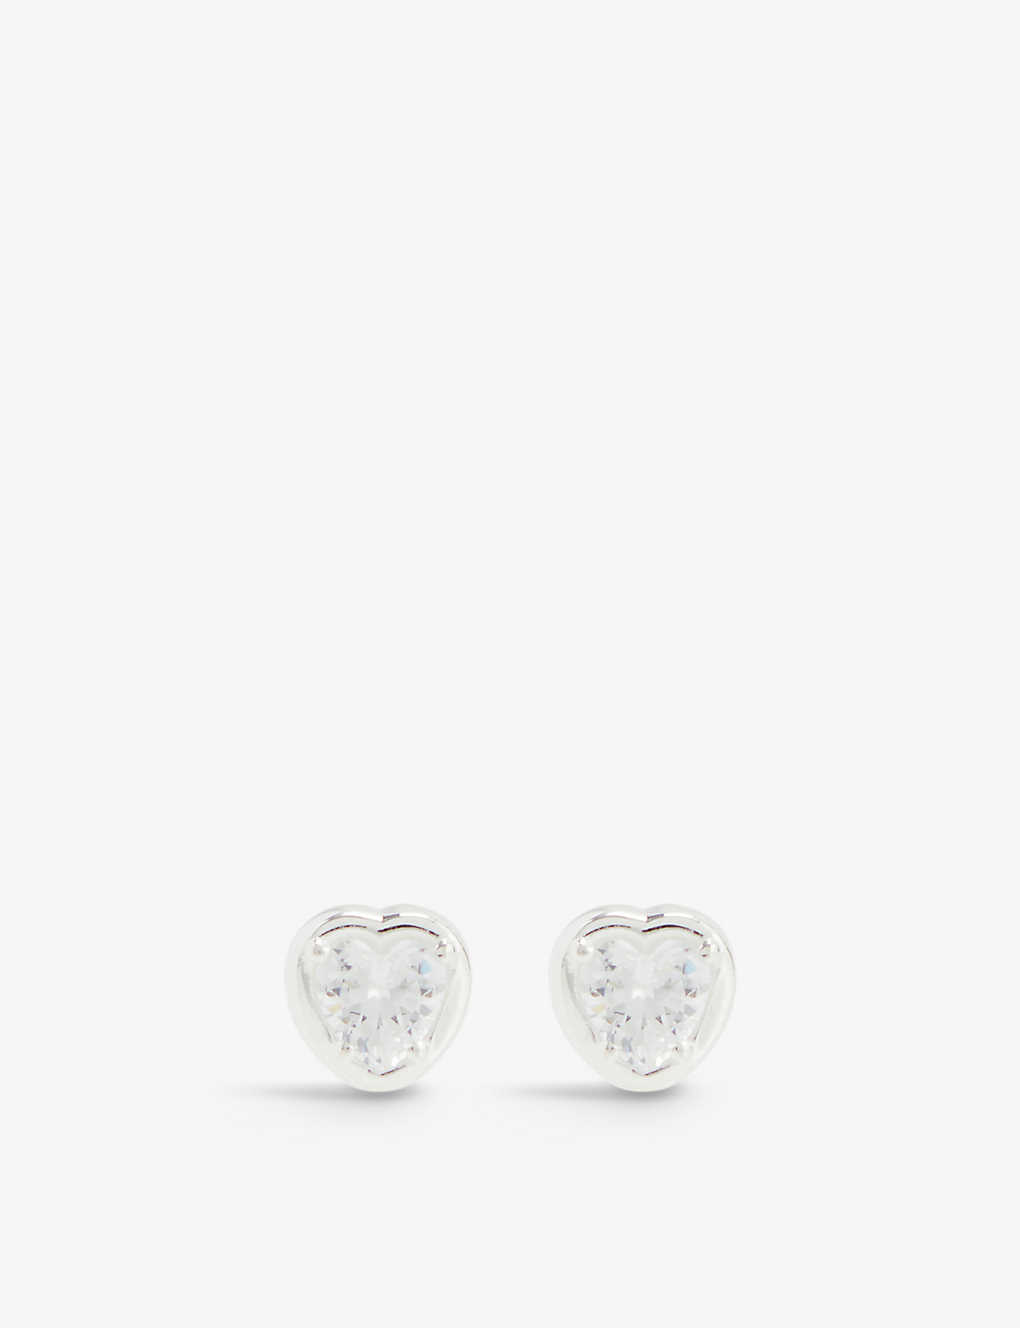 HATTON LABS HATTON LABS MEN'S SILVER WHITE HEART STERLING-SILVER AND CUBIC ZIRCONIA EARRINGS,67167839